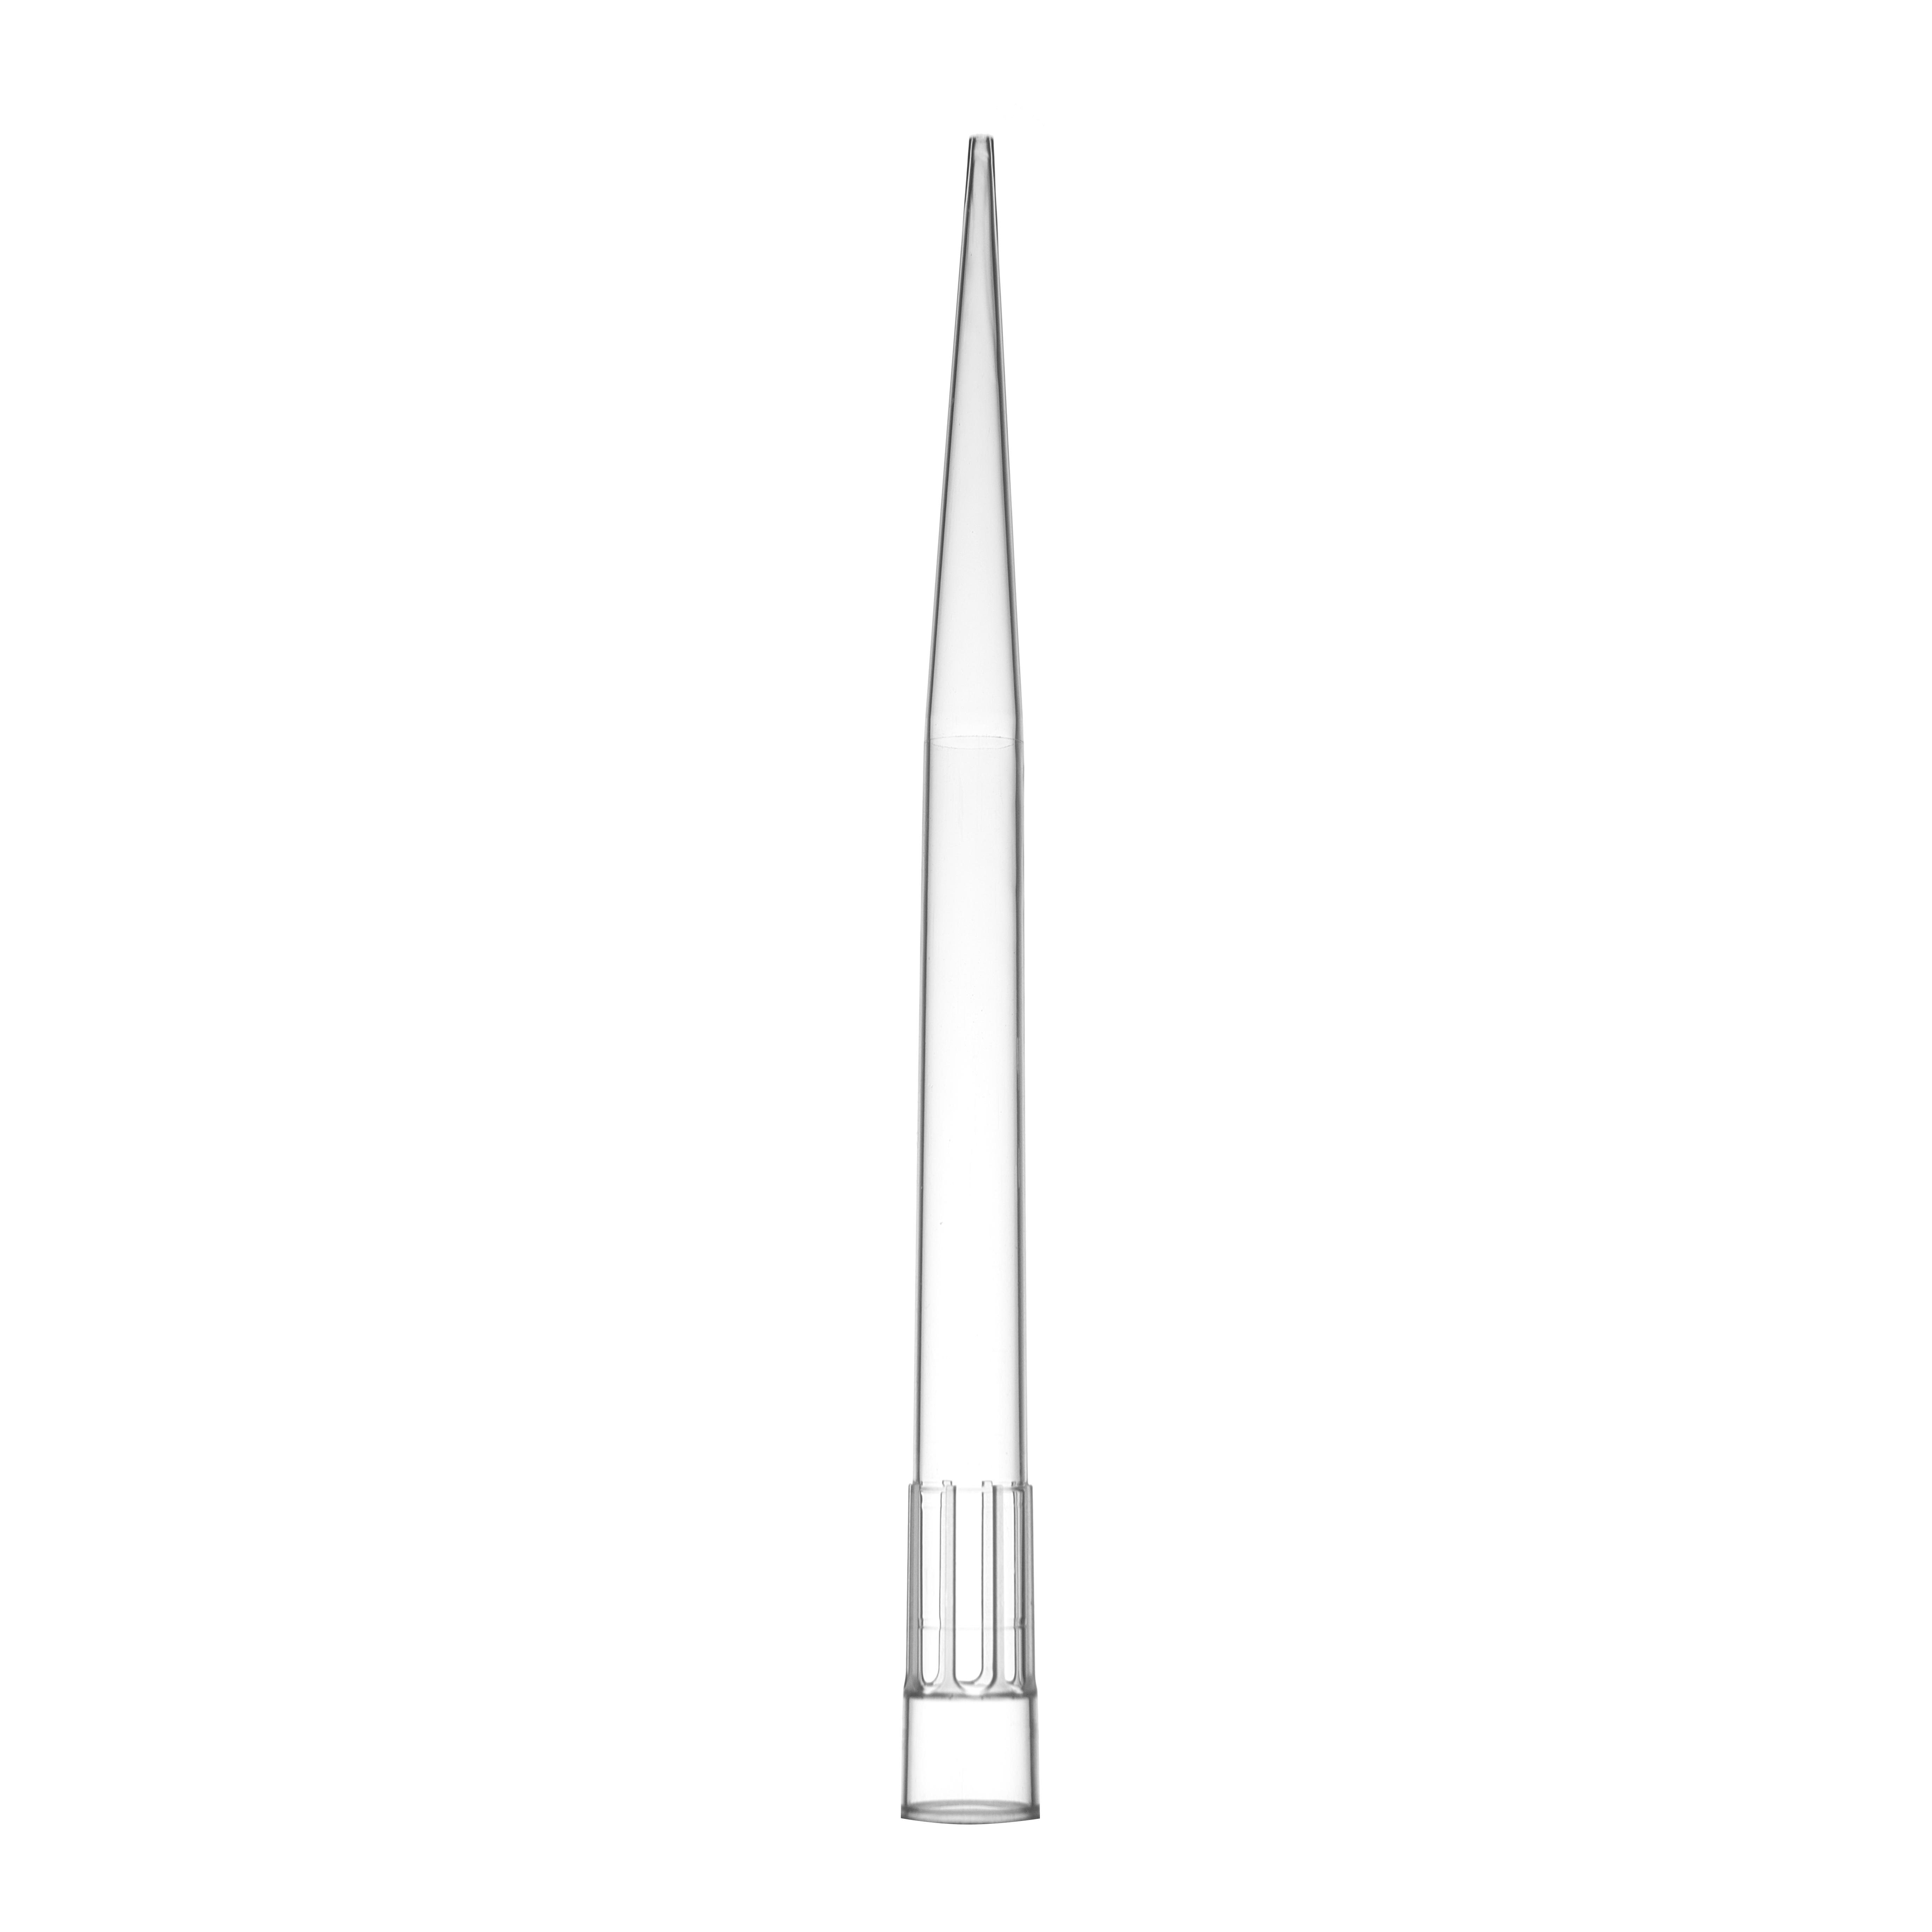 What do pipette tips do for liquid handling in the laboratory